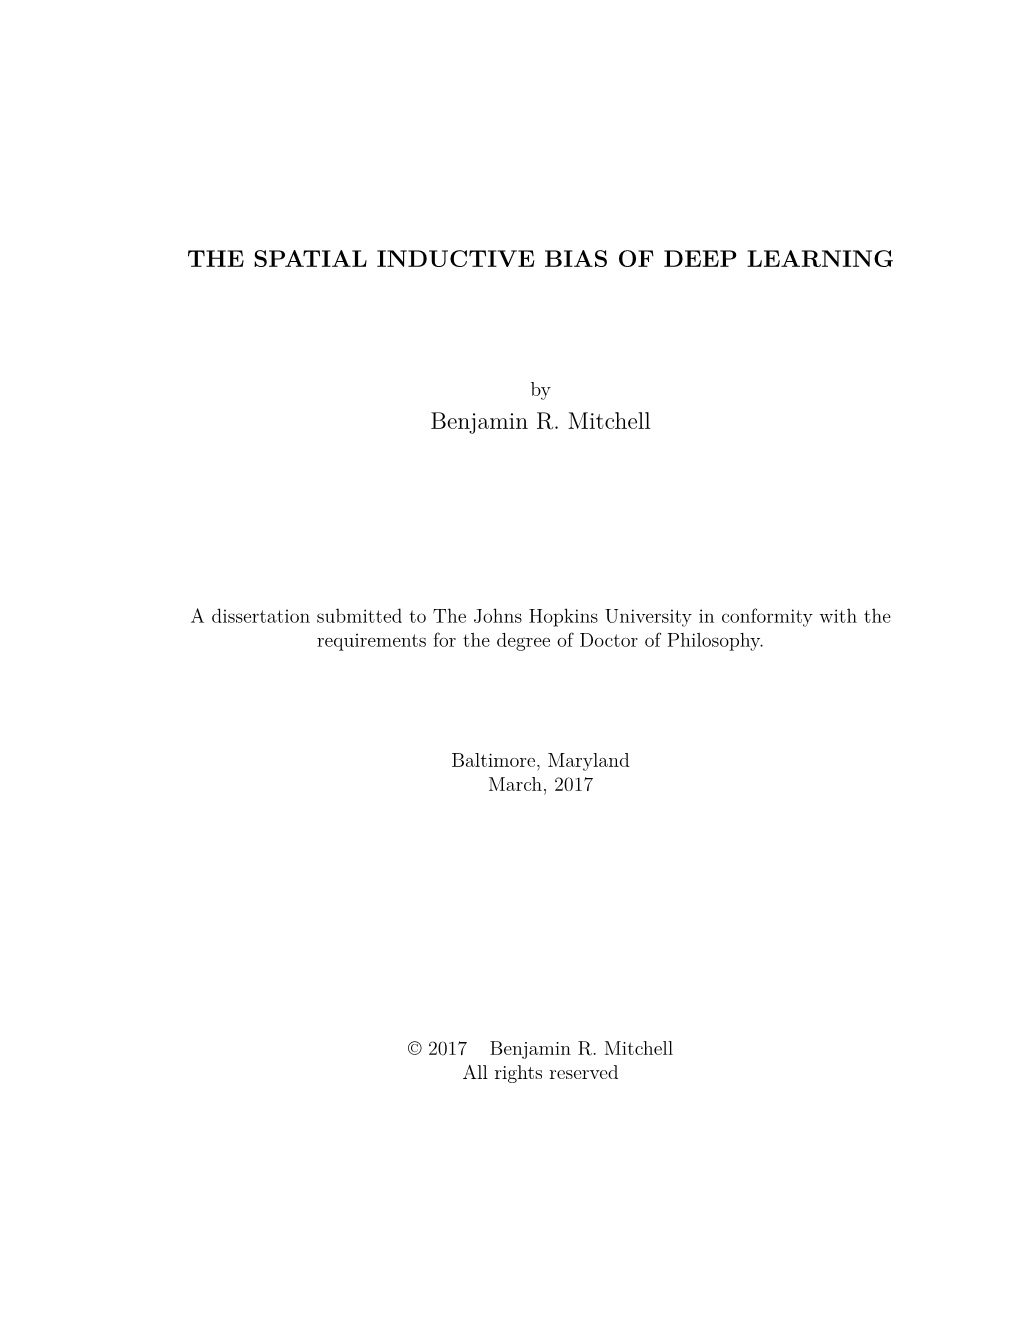 The Spatial Inductive Bias of Deep Learning